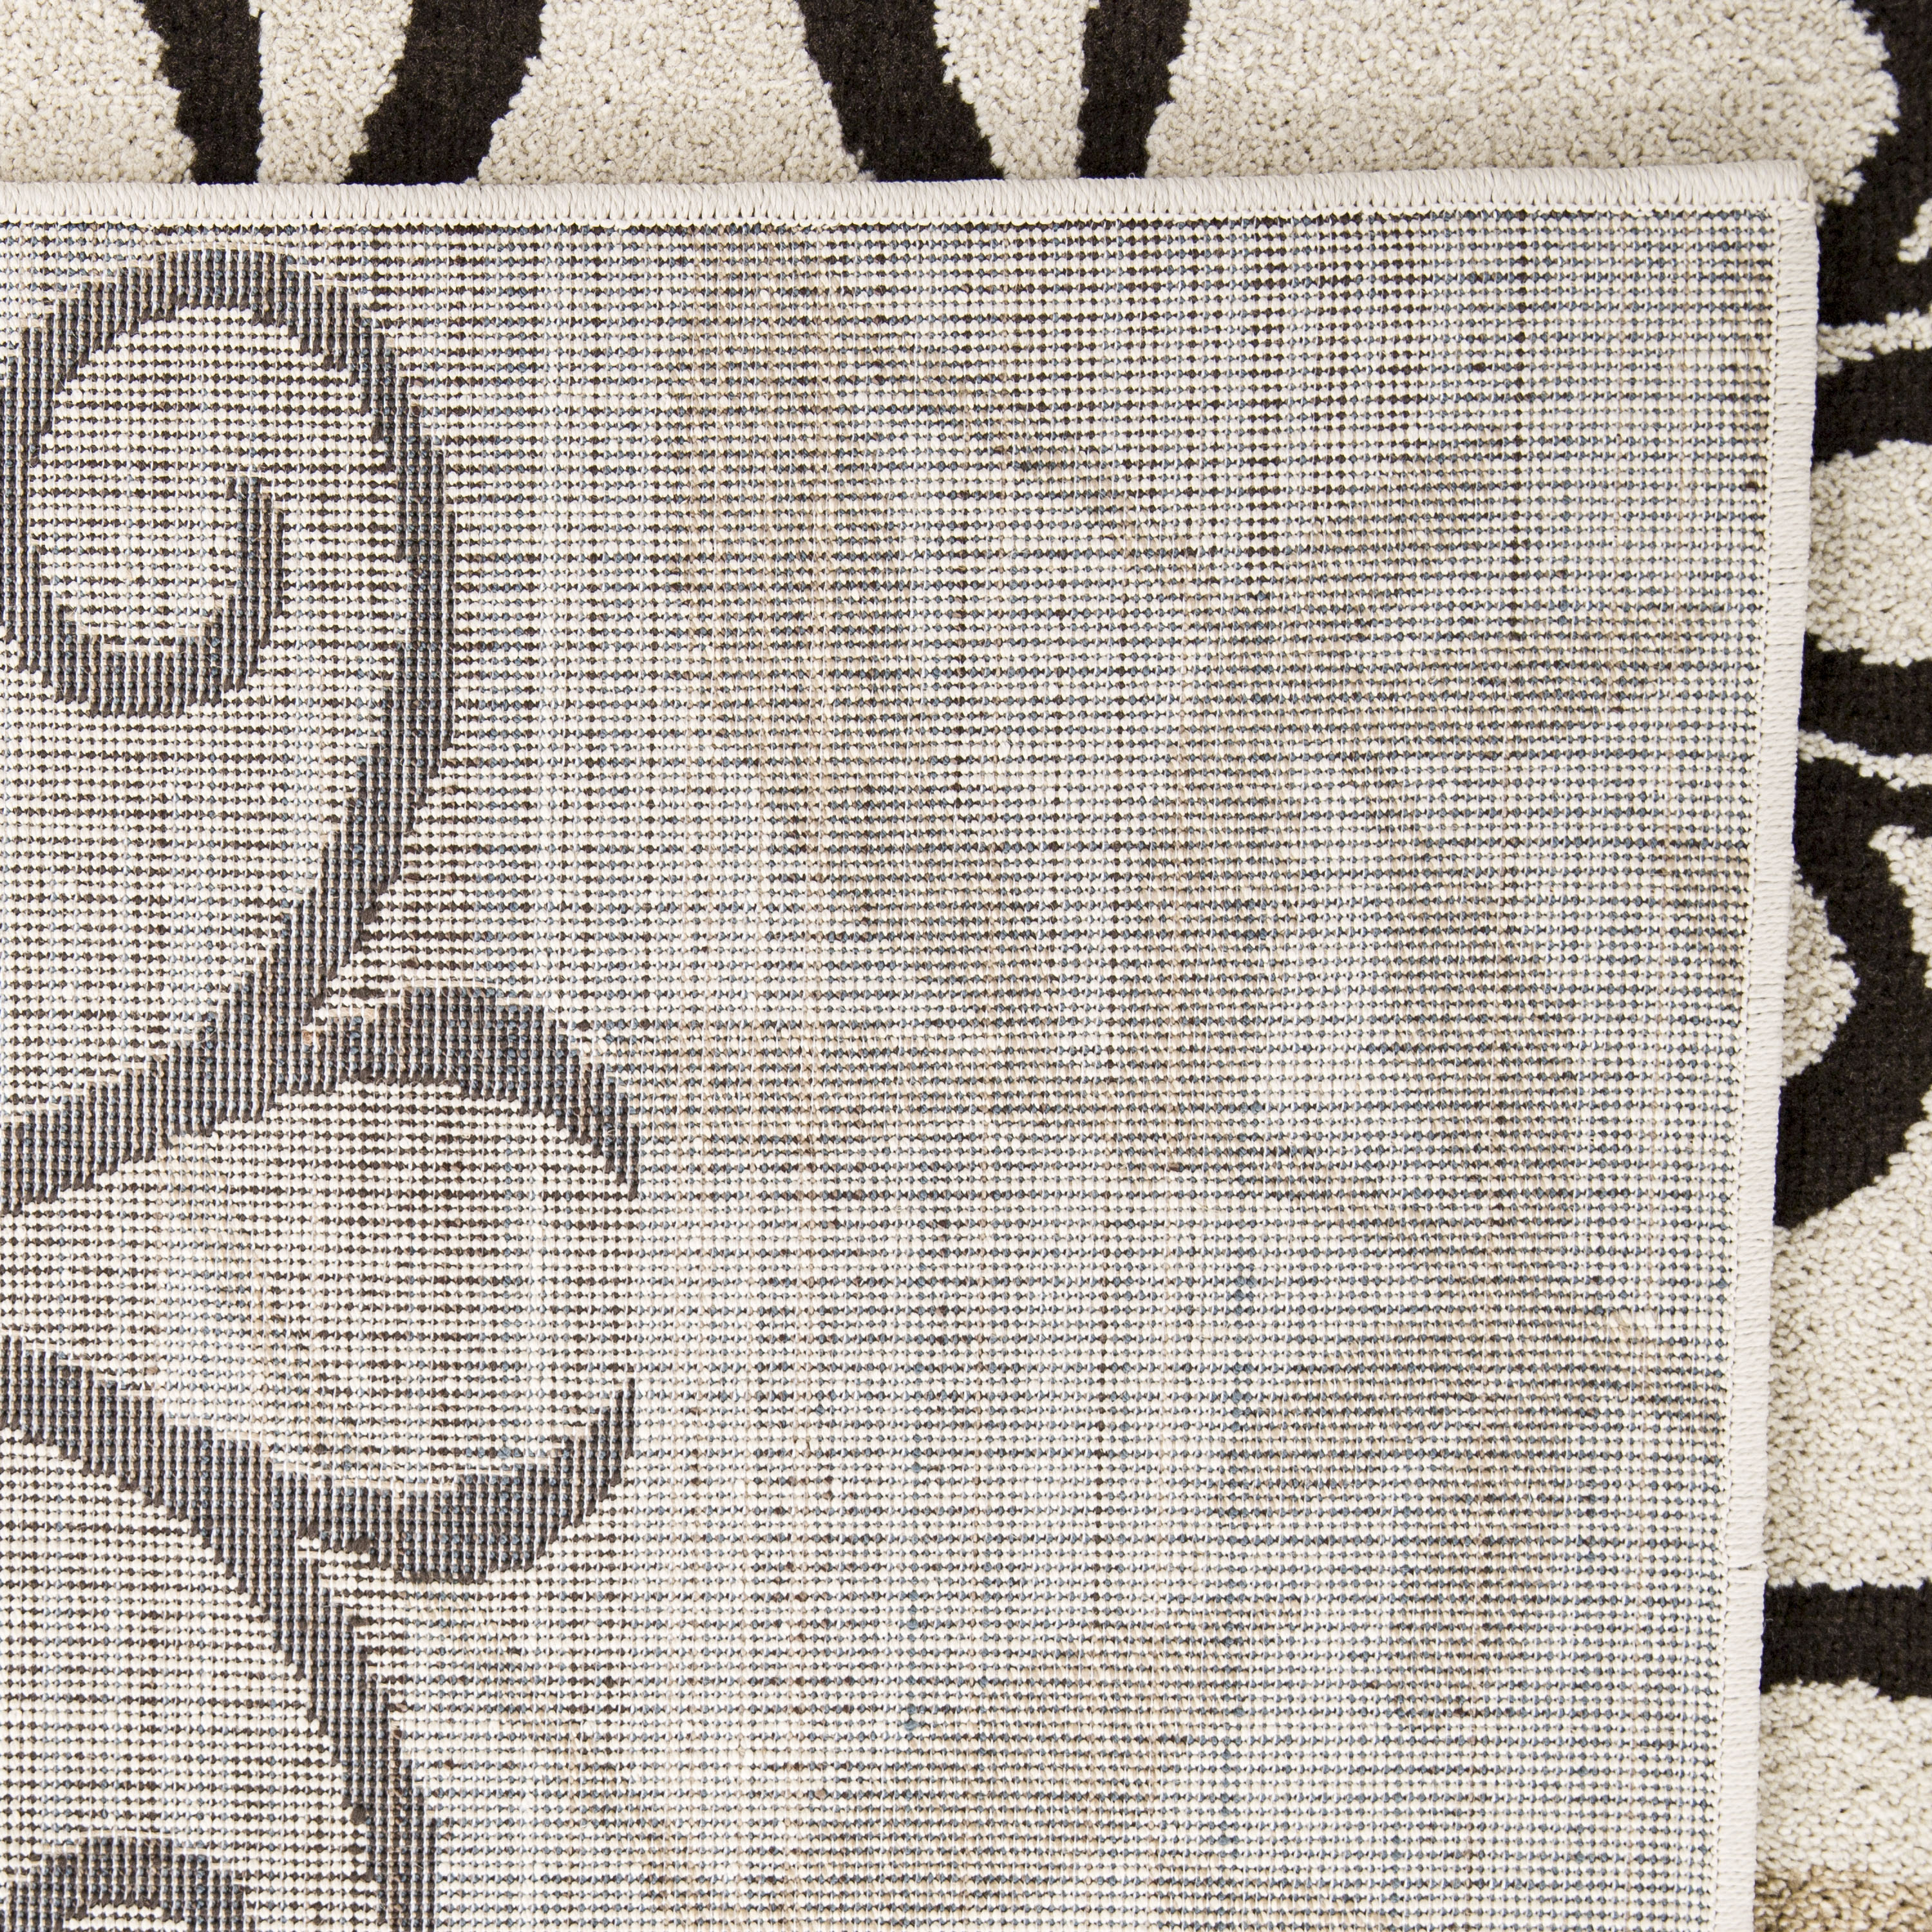 Better Homes & Gardens Iron Fleur Area Rug, Off-White, 7'10" x 10'10" - image 3 of 8